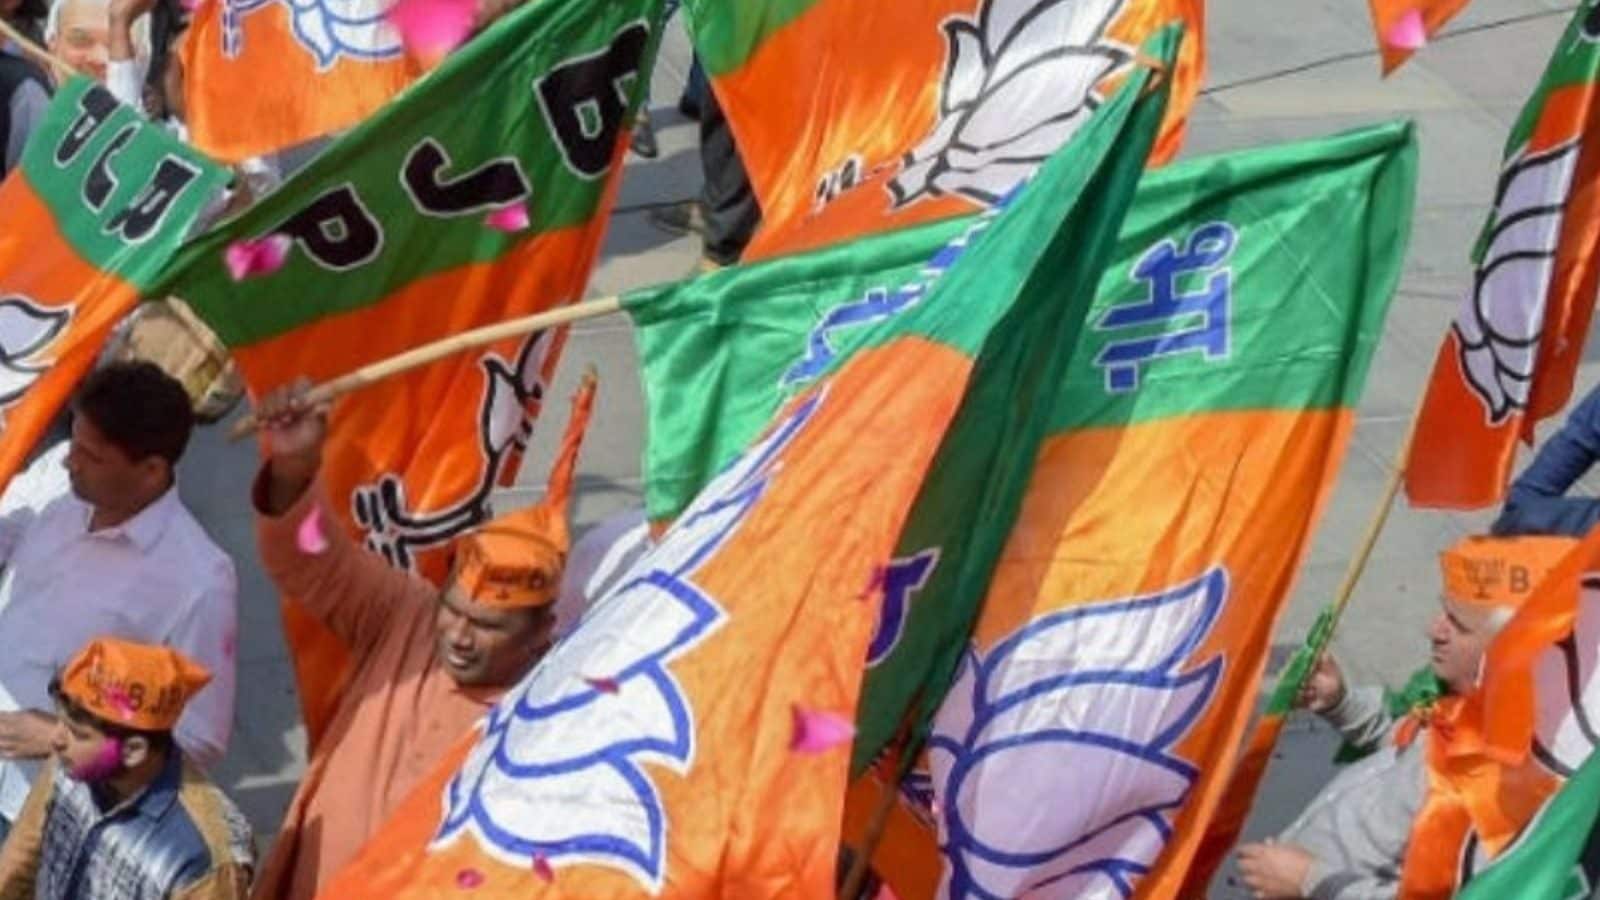 Seven FIRs Registered Over BJP’s Rally in Mumbai For Violating Covid Norms